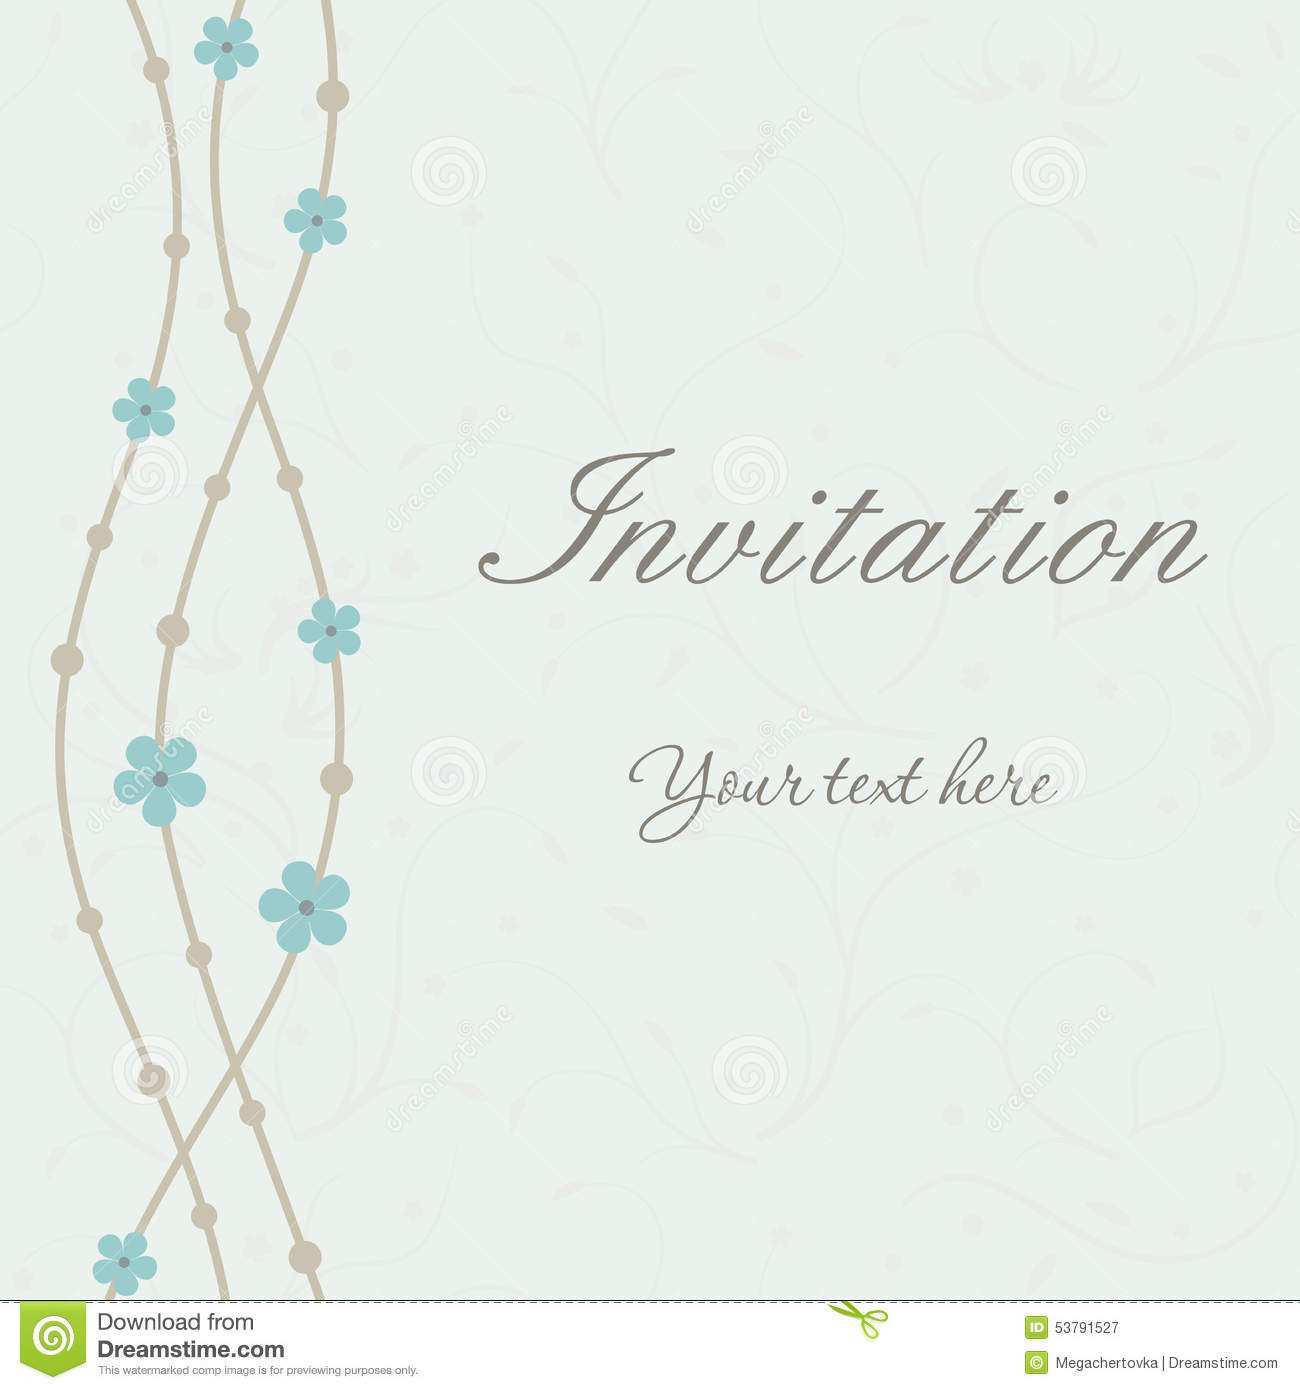 44 Free Printable Invitation Card Without Text Templates with Invitation Card Without Text